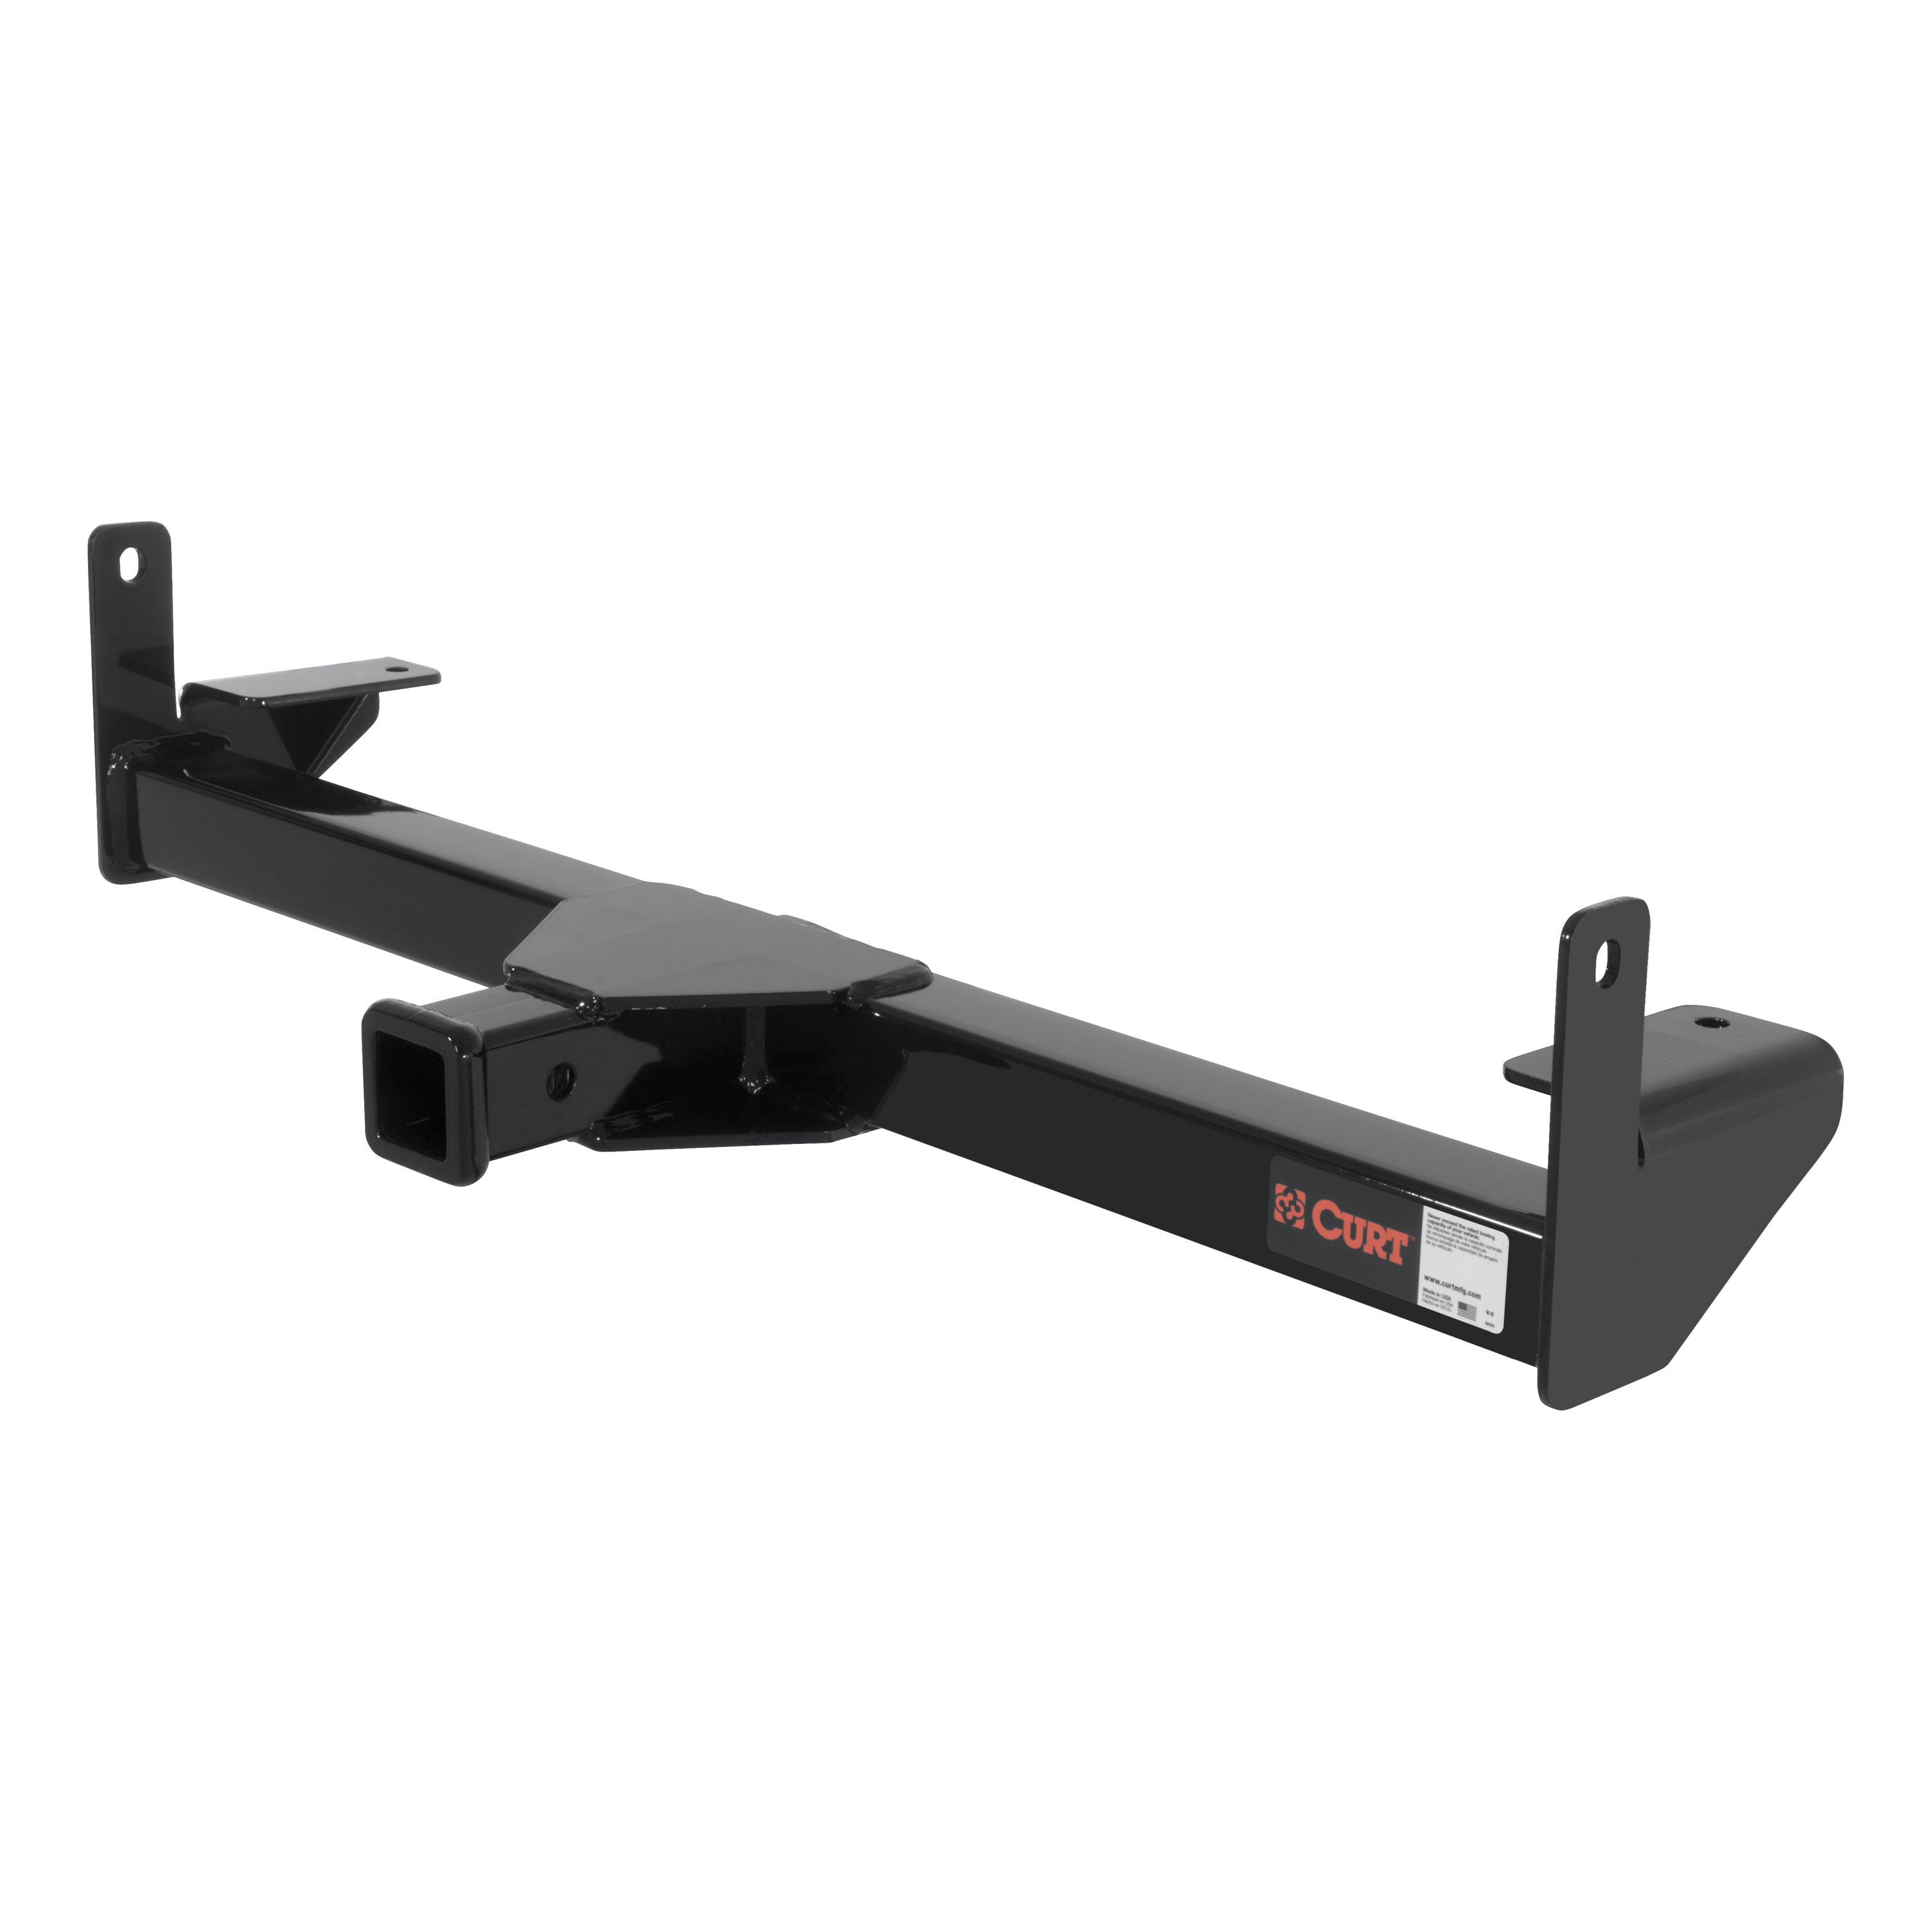 CURT 31017 2 Front Receiver Hitch, Select Dodge Ram 1500, 2500, 3500